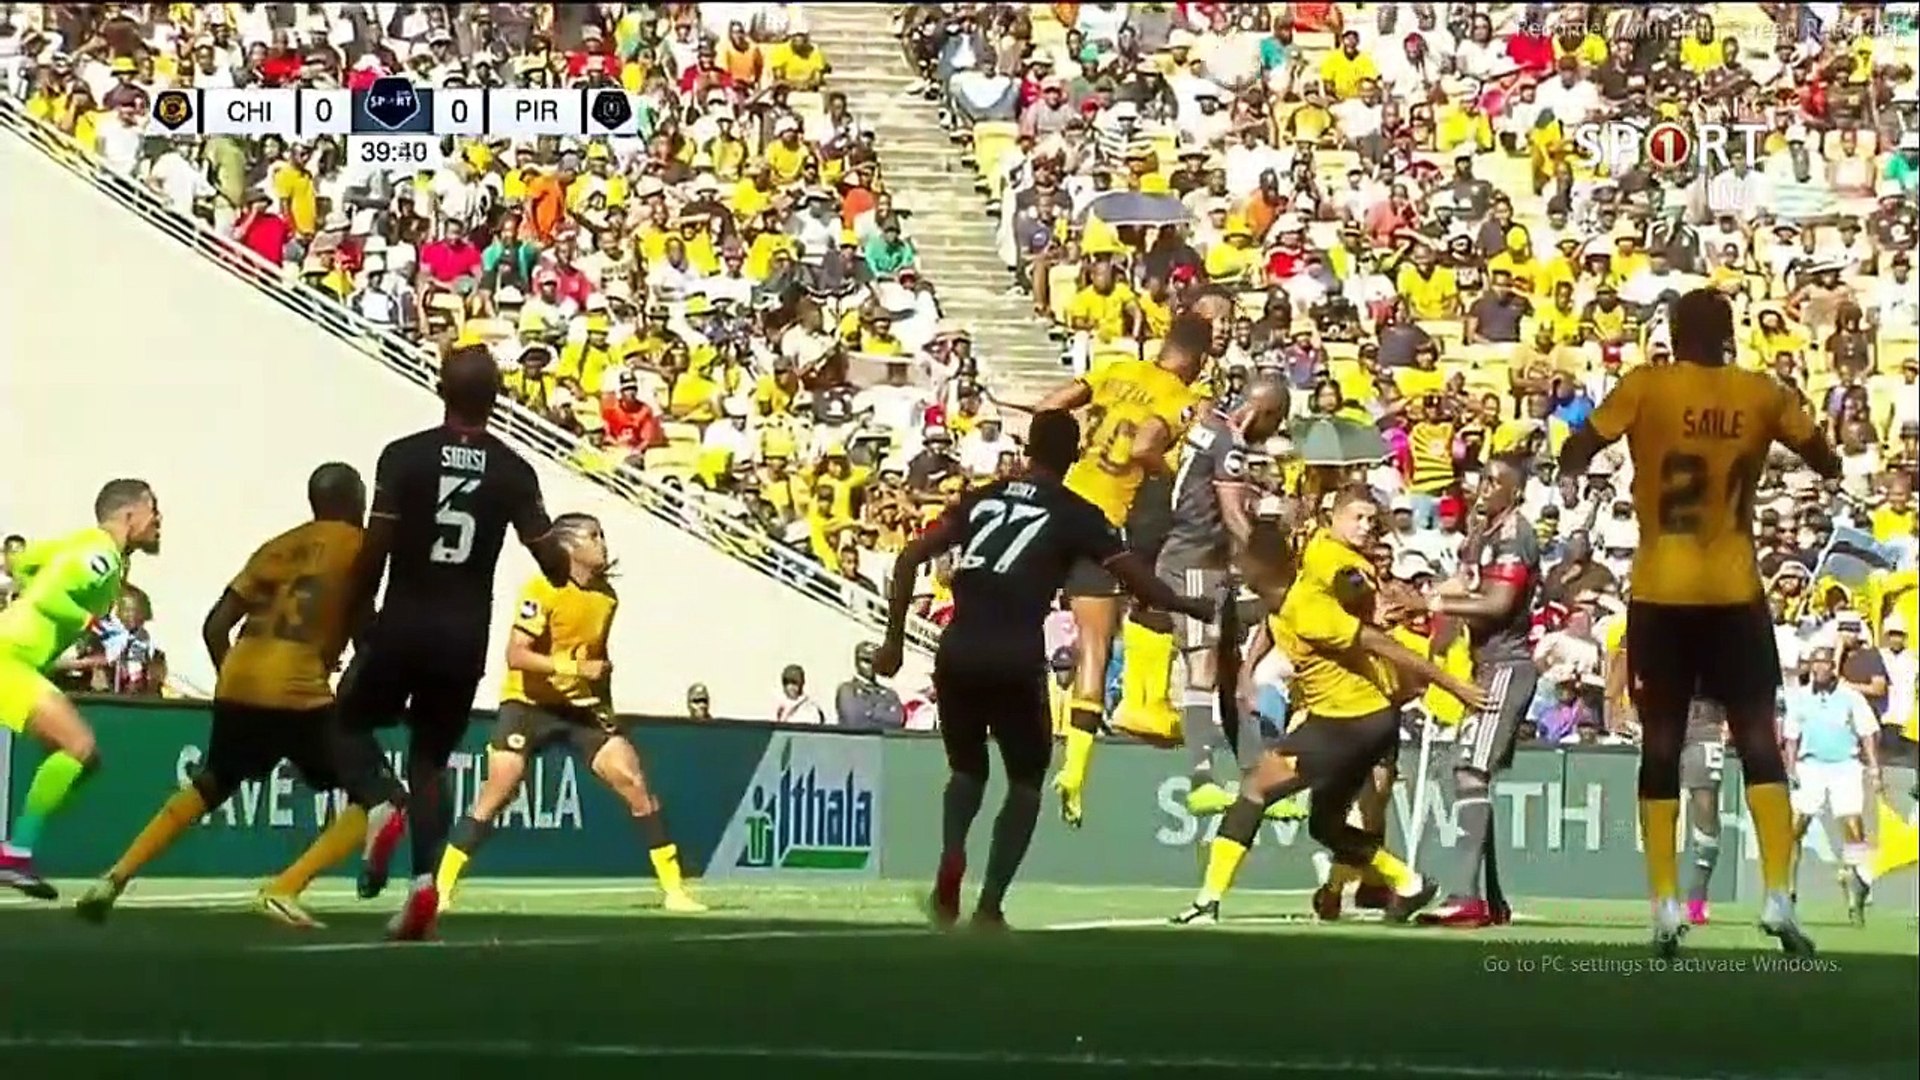 Orlando Pirates 0-1 Kaizer Chiefs: The Soweto Derby as it happened